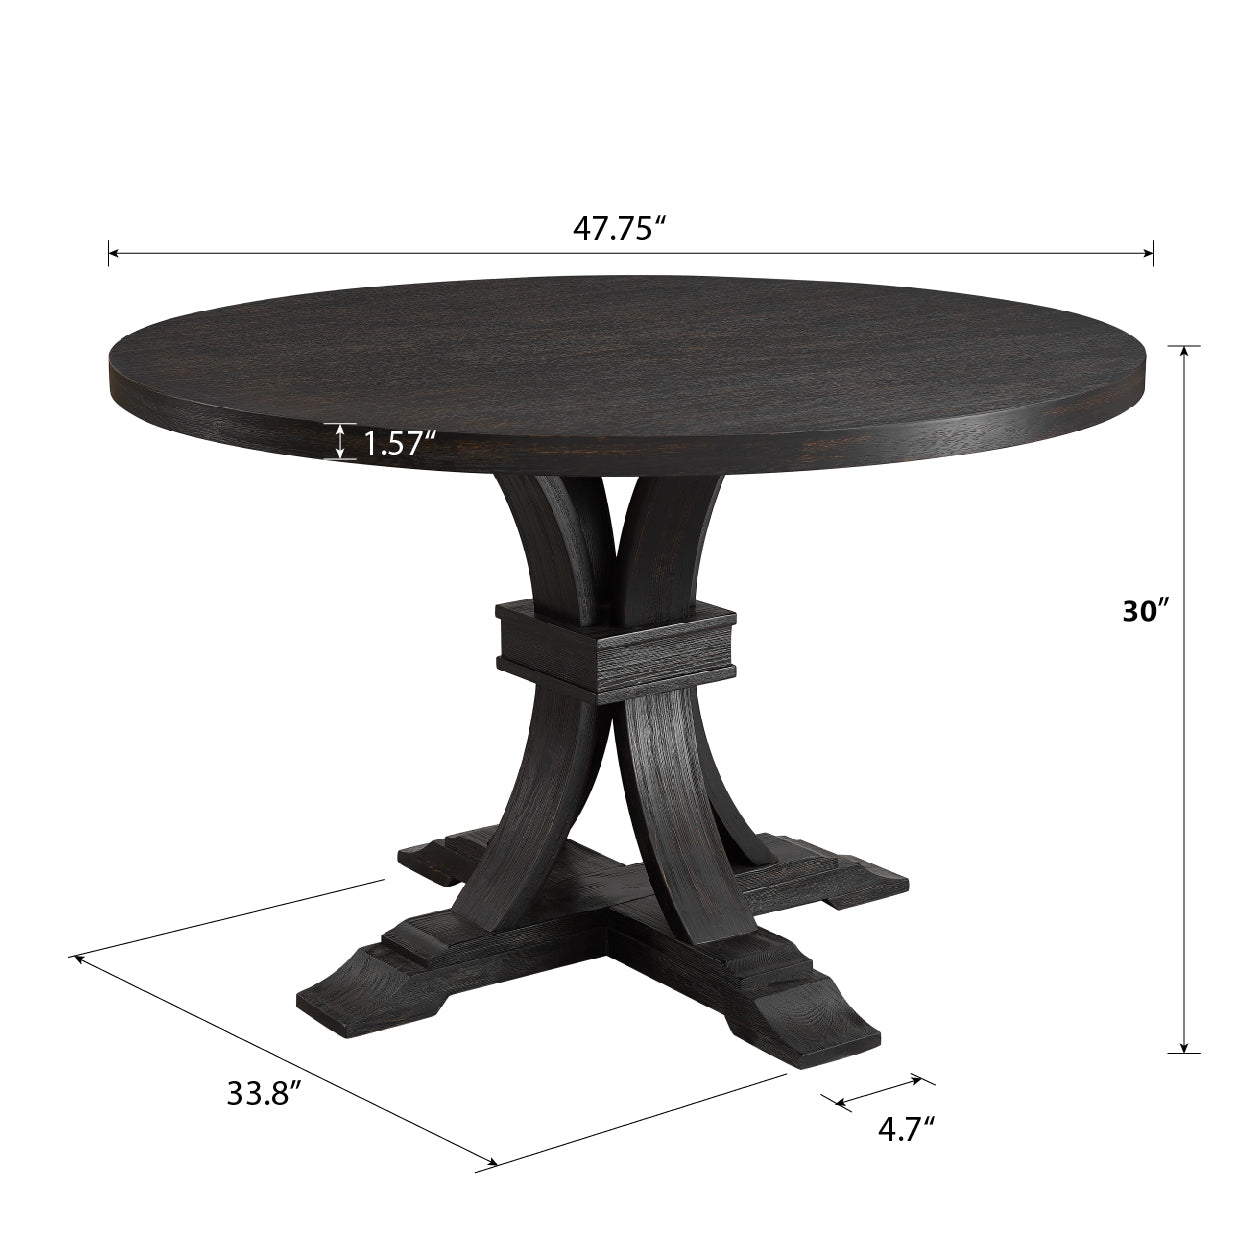 Eton 5-piece Dining Set, Distressed Pedestal Round Table with 4 Stylish Chairs